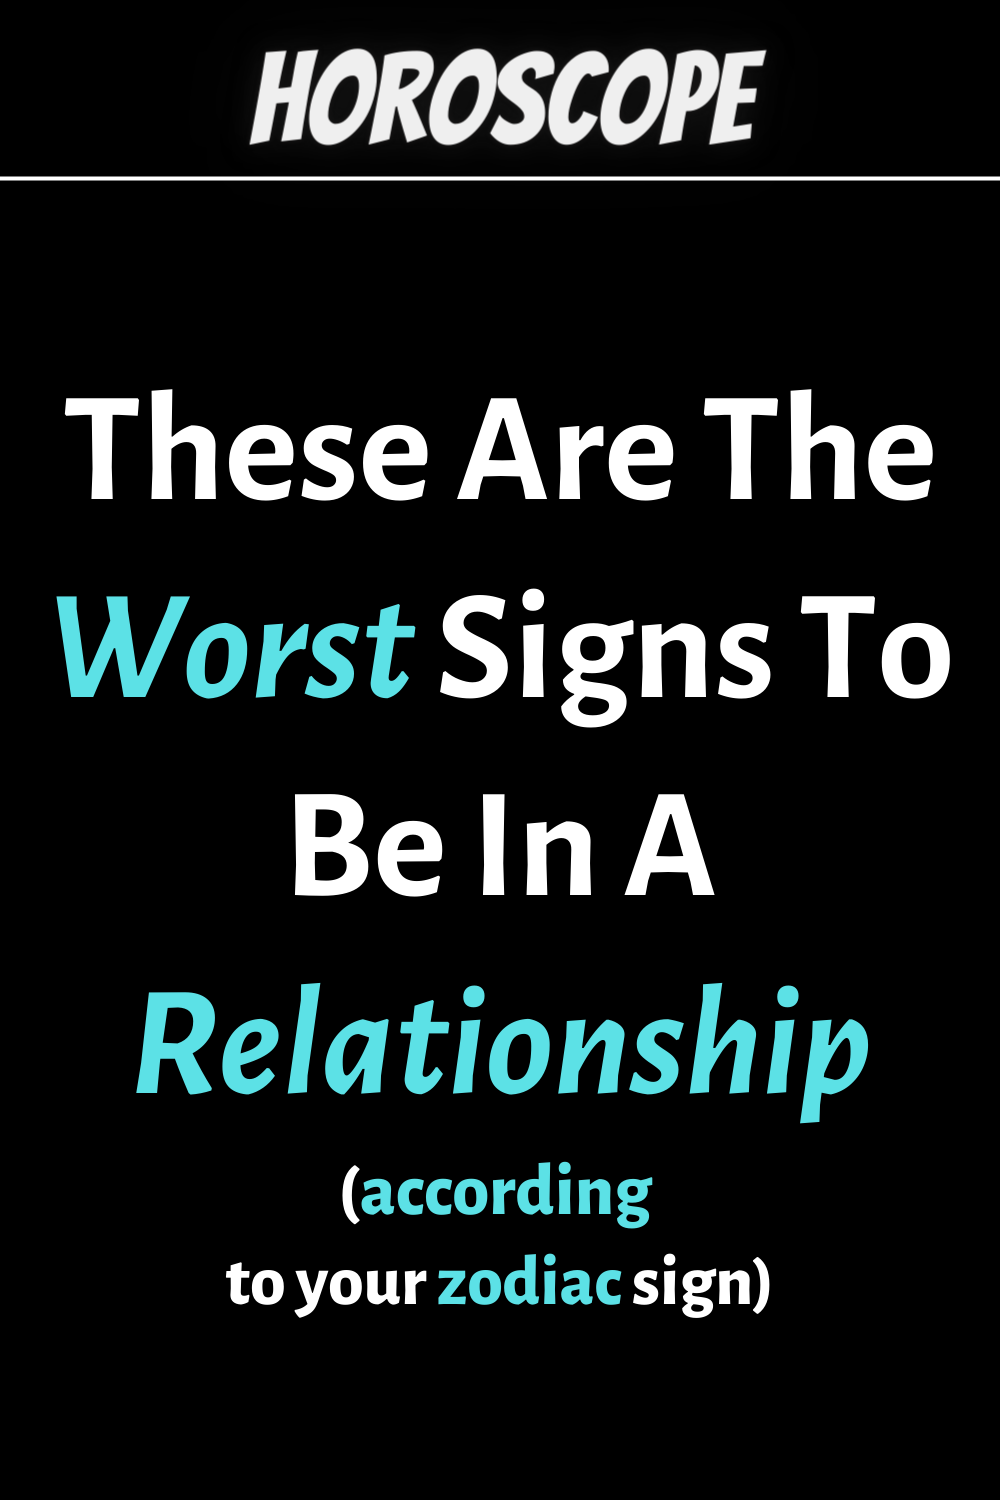 These Are The Worst Signs To Be In A Relationship